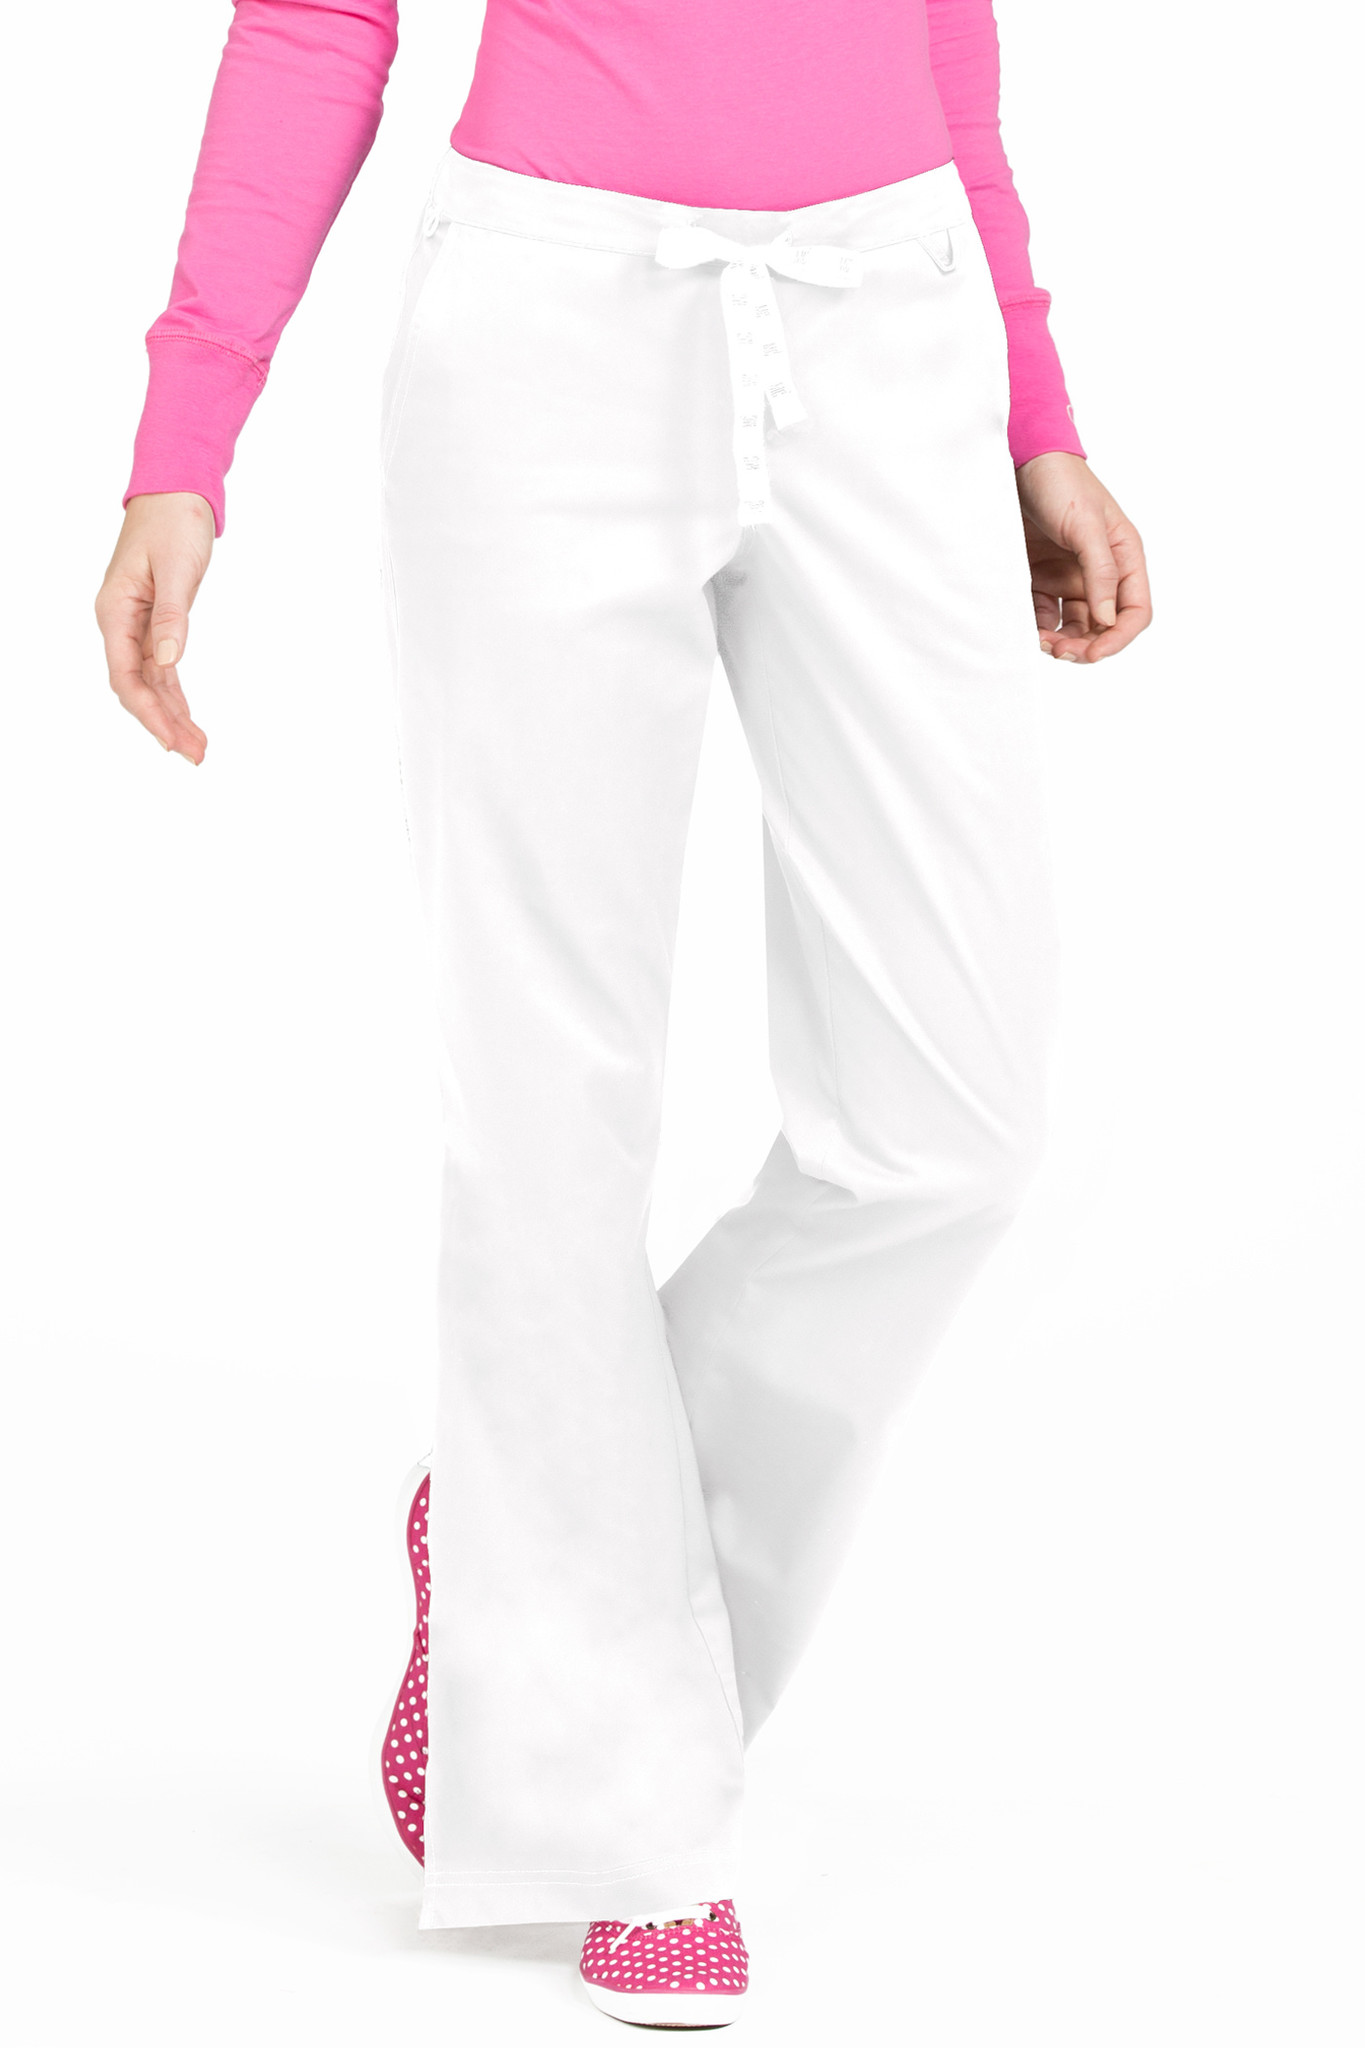 Med Couture Activate Double Shift Pants 8742 - CSE Mobility and Scrubs